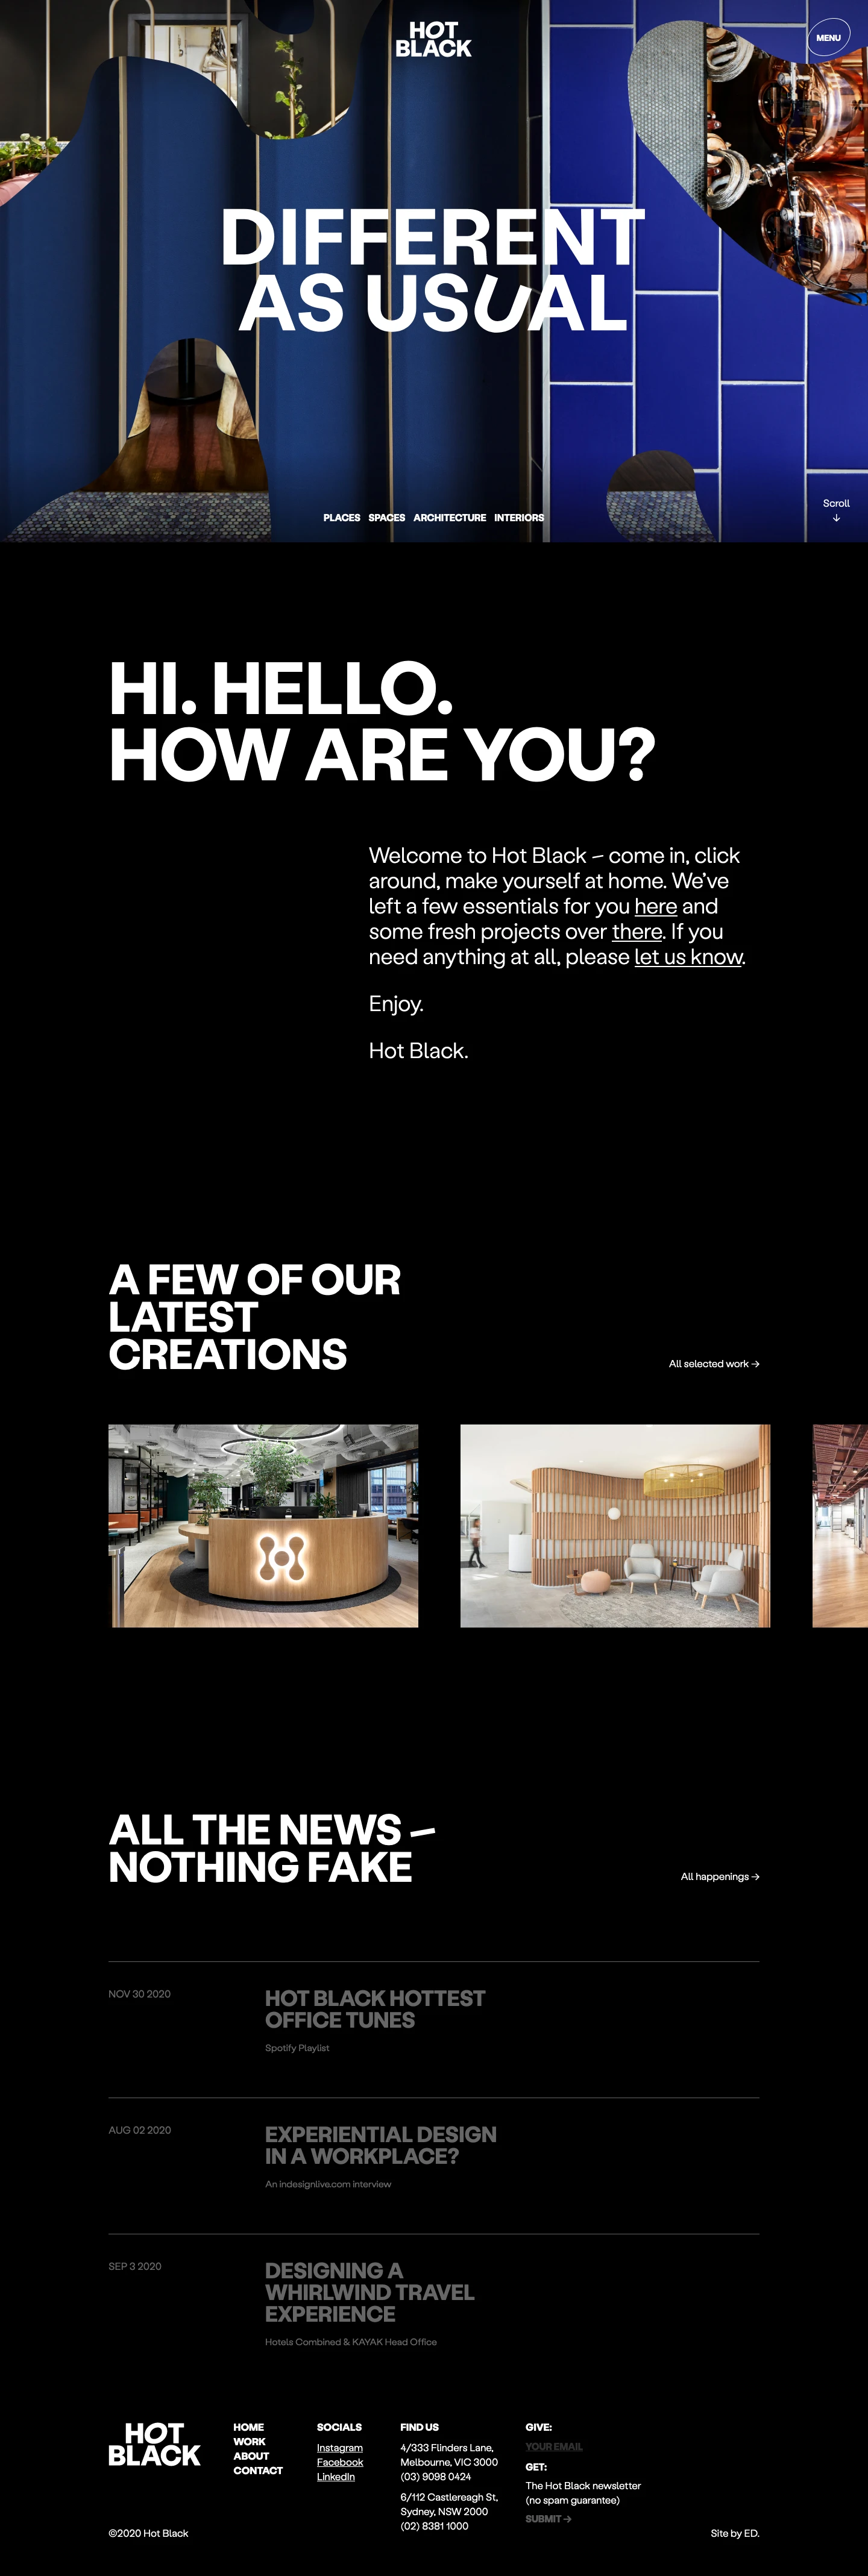 Hot Black Landing Page Example: We are Hot Black, an interdisciplinary design practice for spaces, places, architecture and interiors.